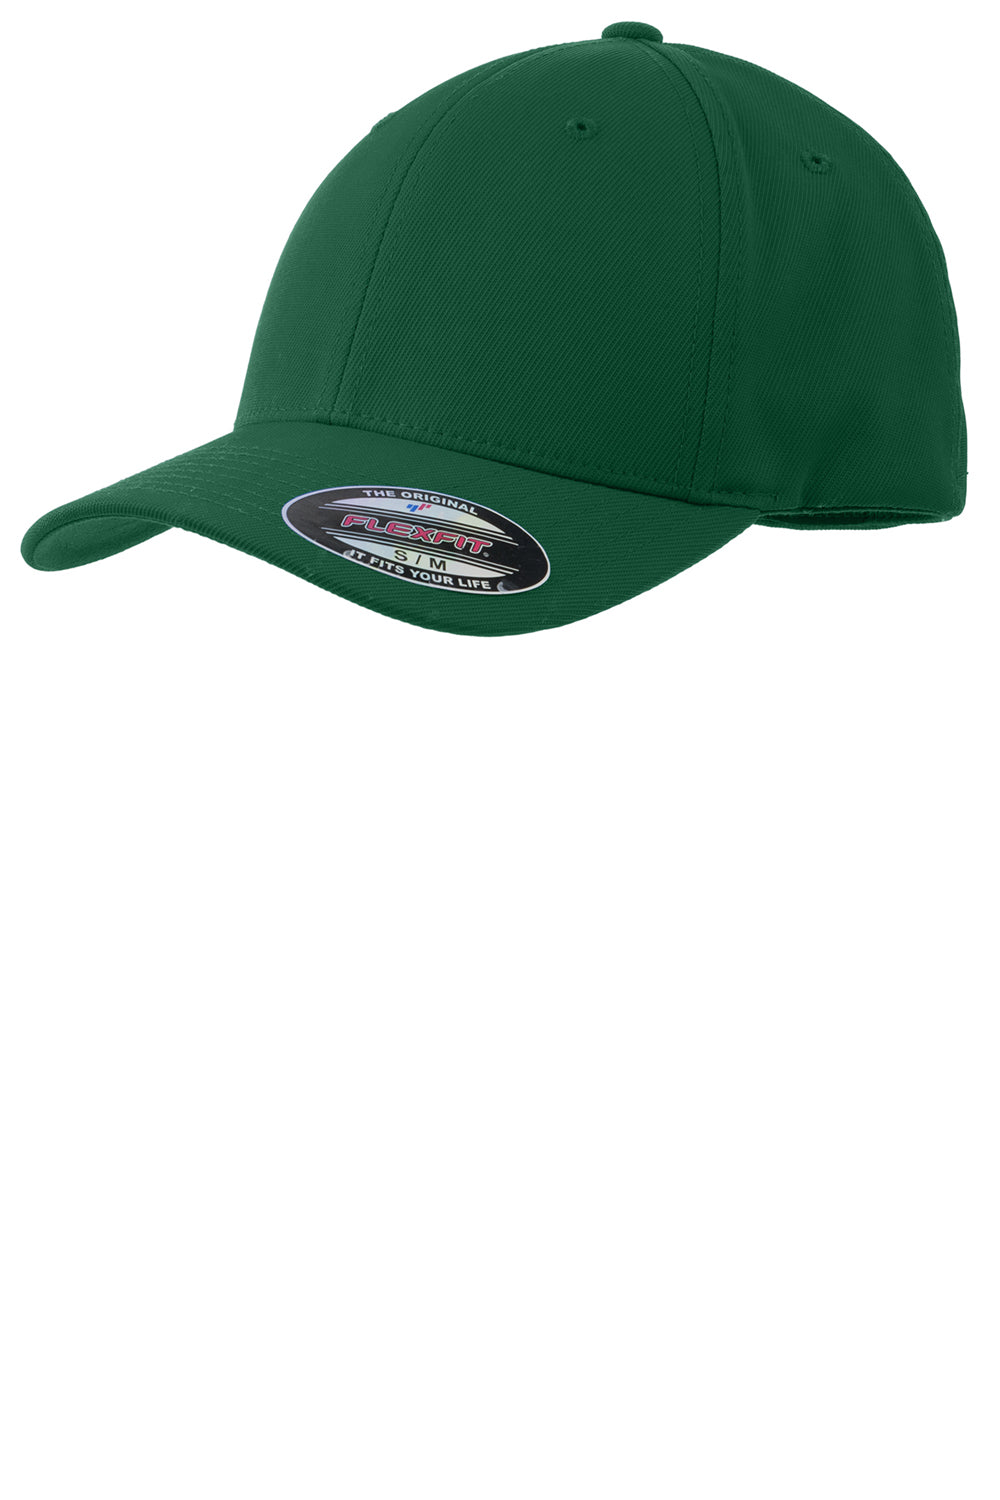 Sport-Tek STC17 Mens Moisture Wicking Stretch Fit Hat Forest Green Front